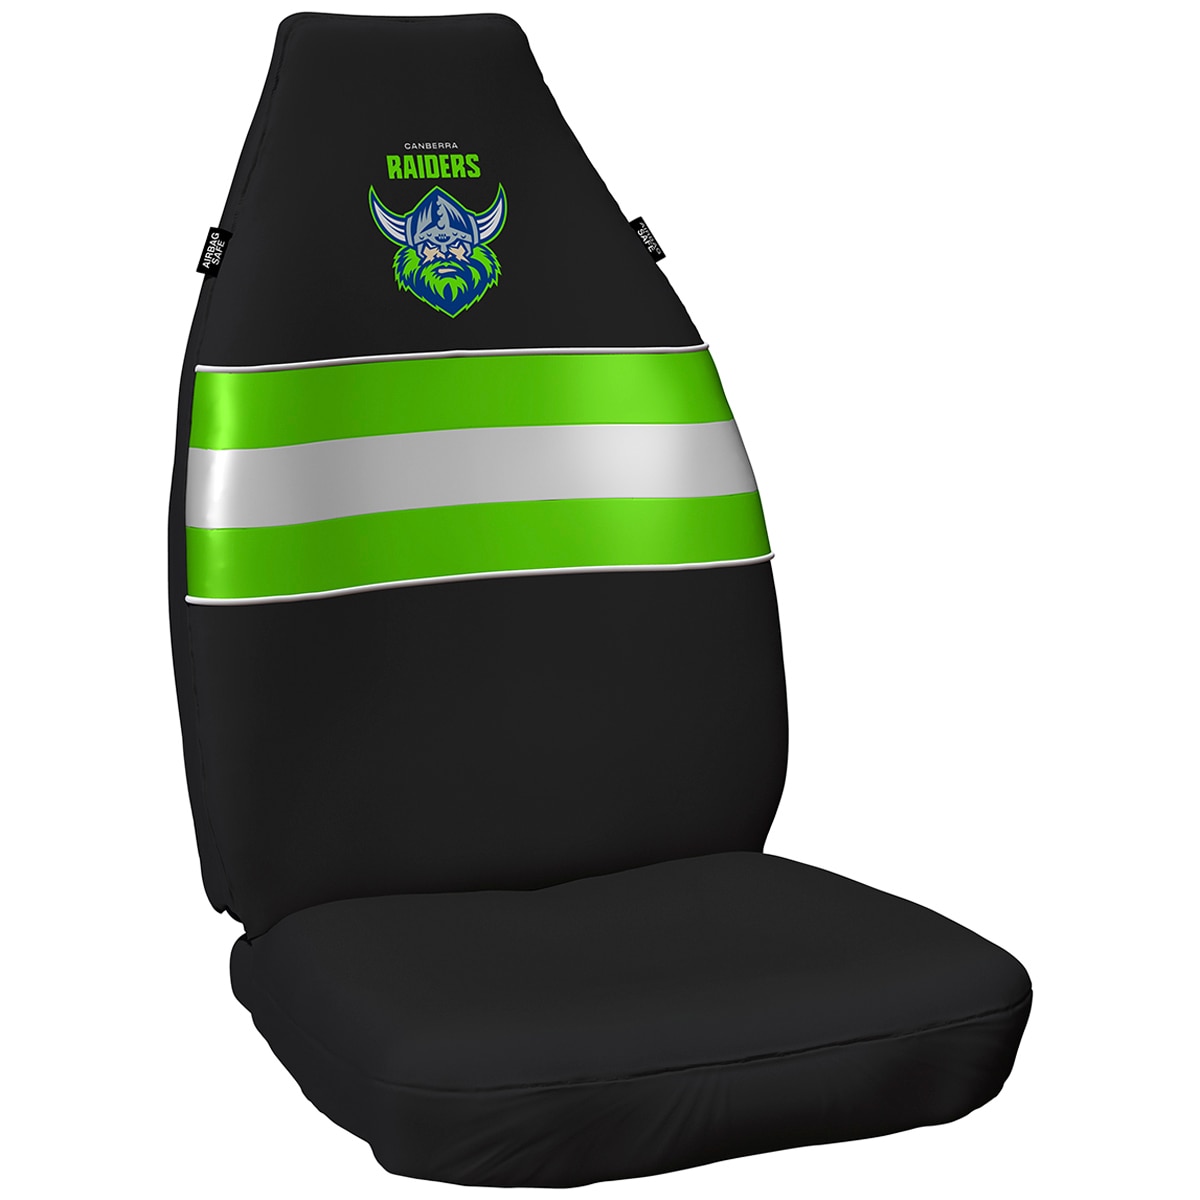 NRL Canberra Raiders Car Seat Cover